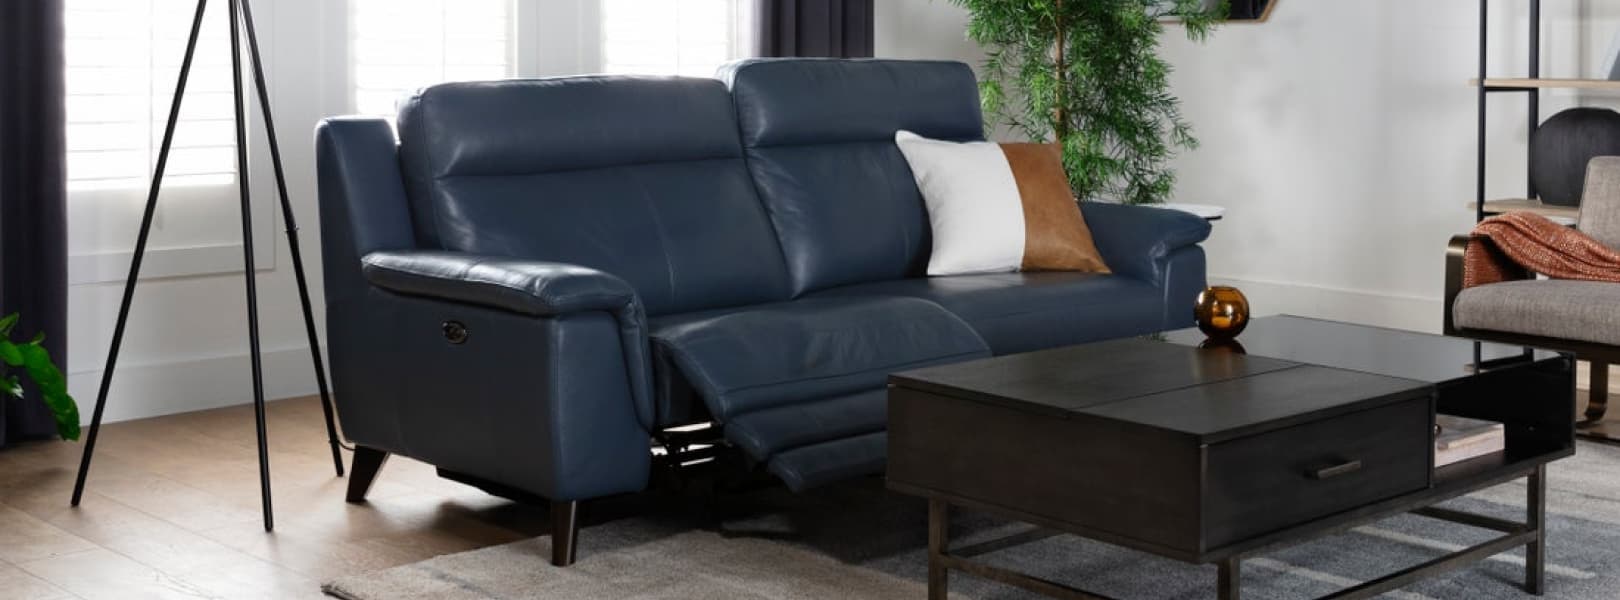 best leather sofas